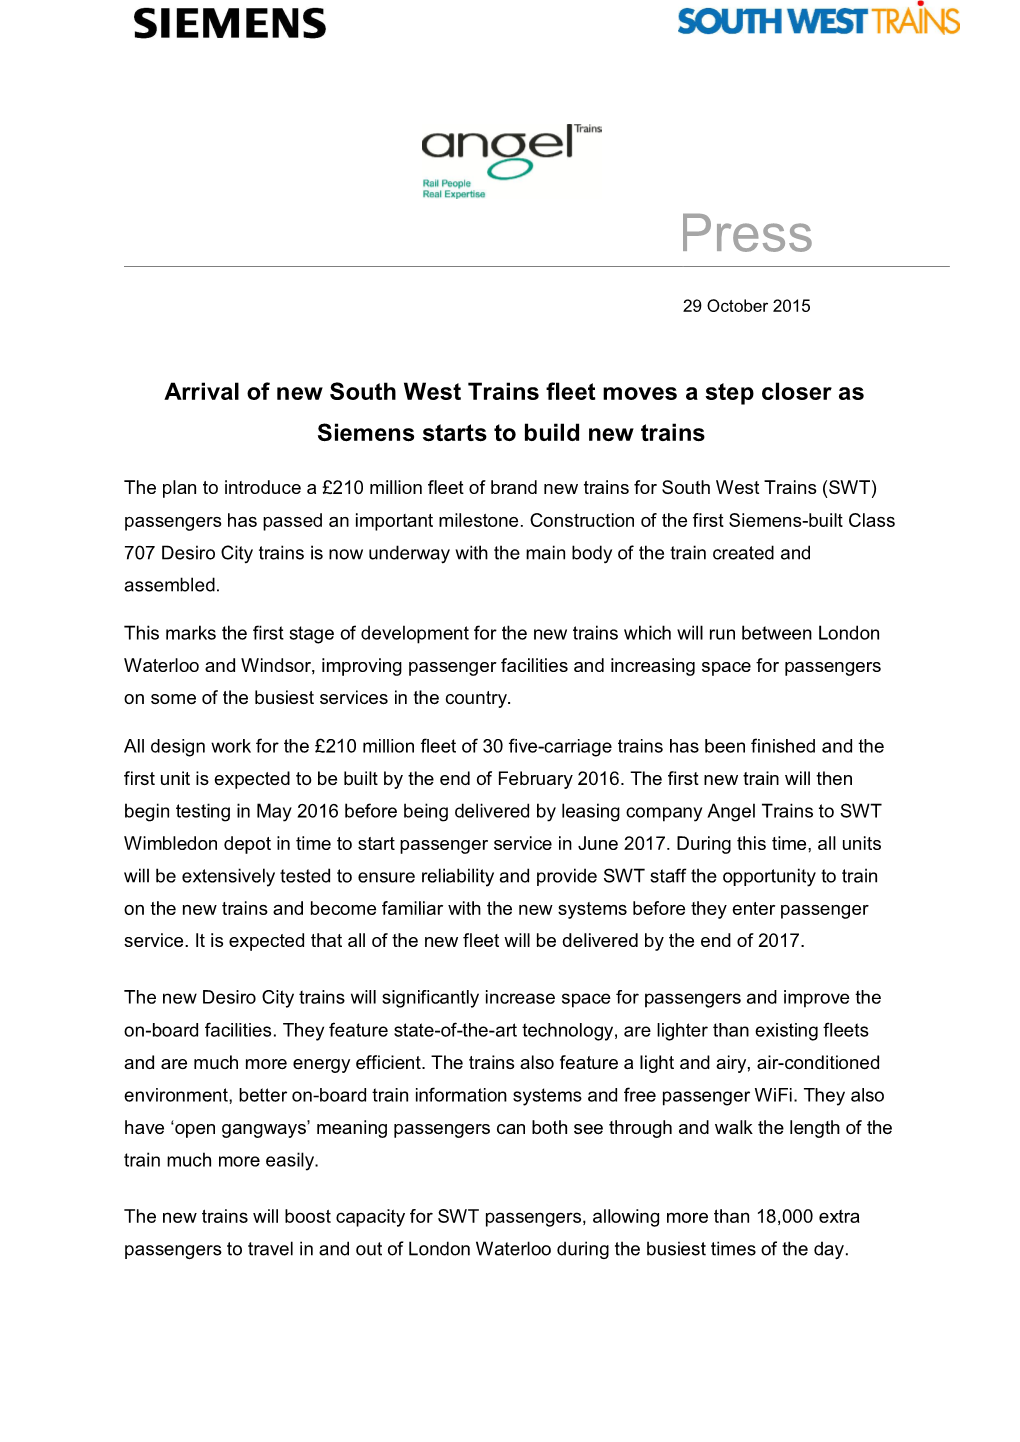 Arrival of New South West Trains Fleet Moves a Step Closer As Siemens Starts to Build New Trains